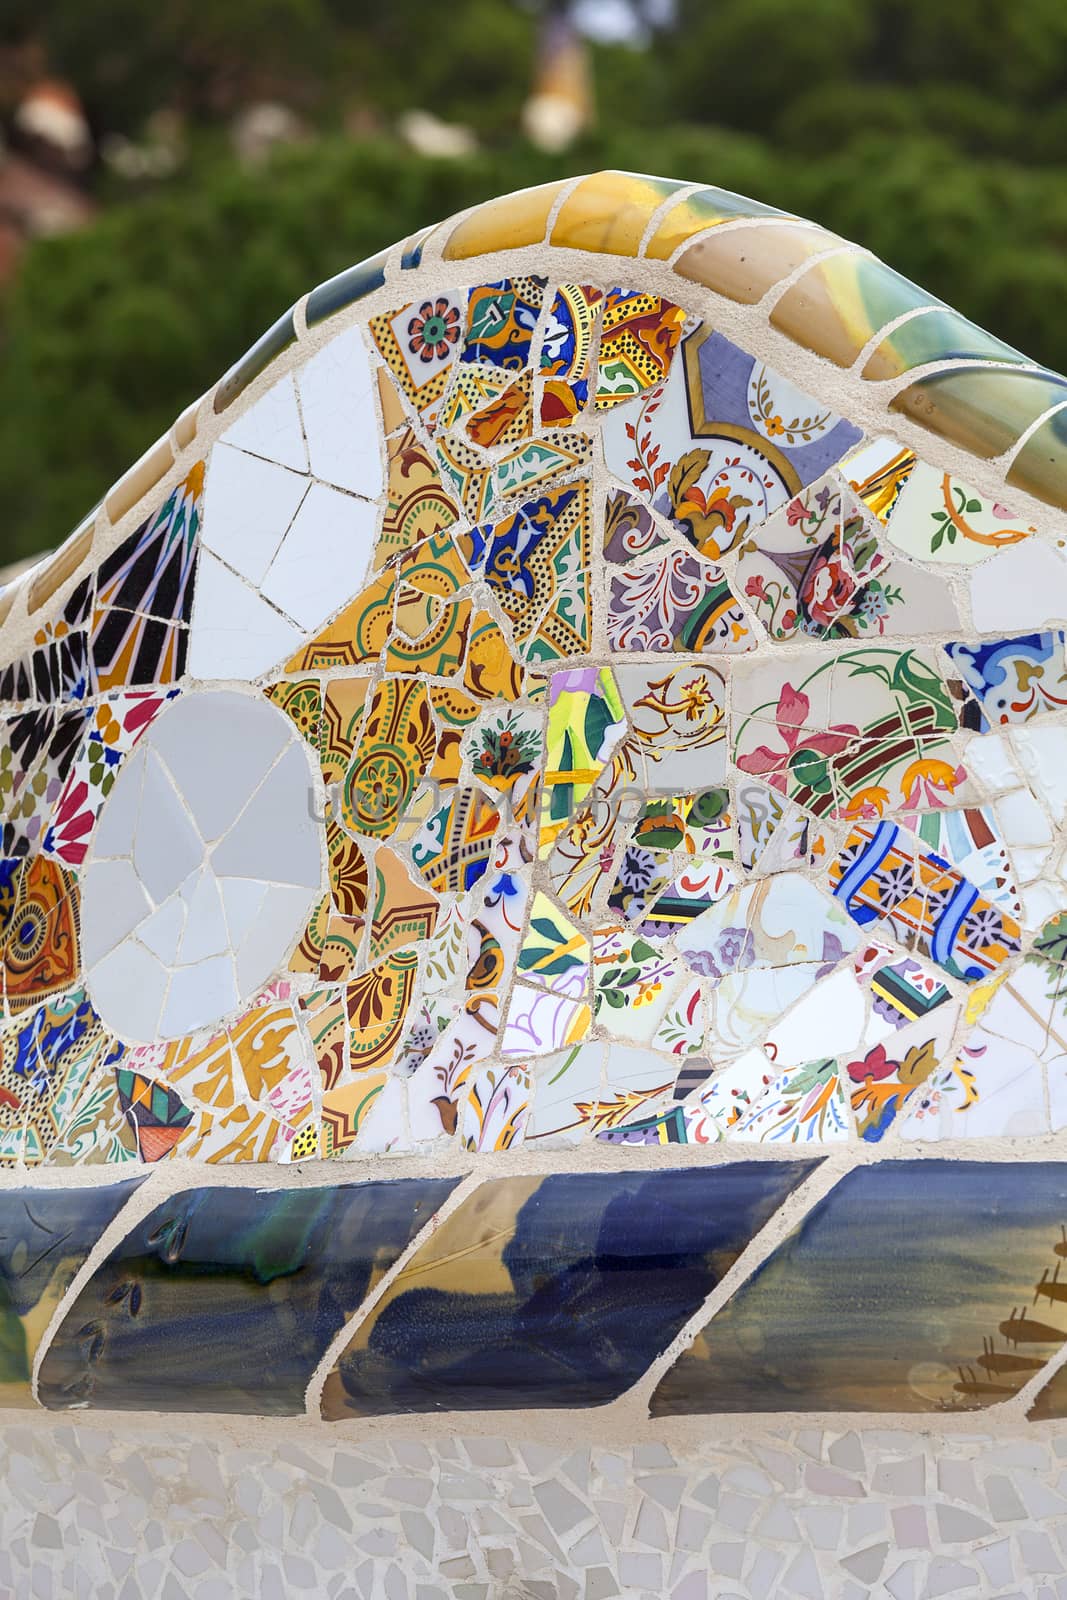 Gaudi multicolored mosaic bench  in Park Guell; Barcelona; Spain